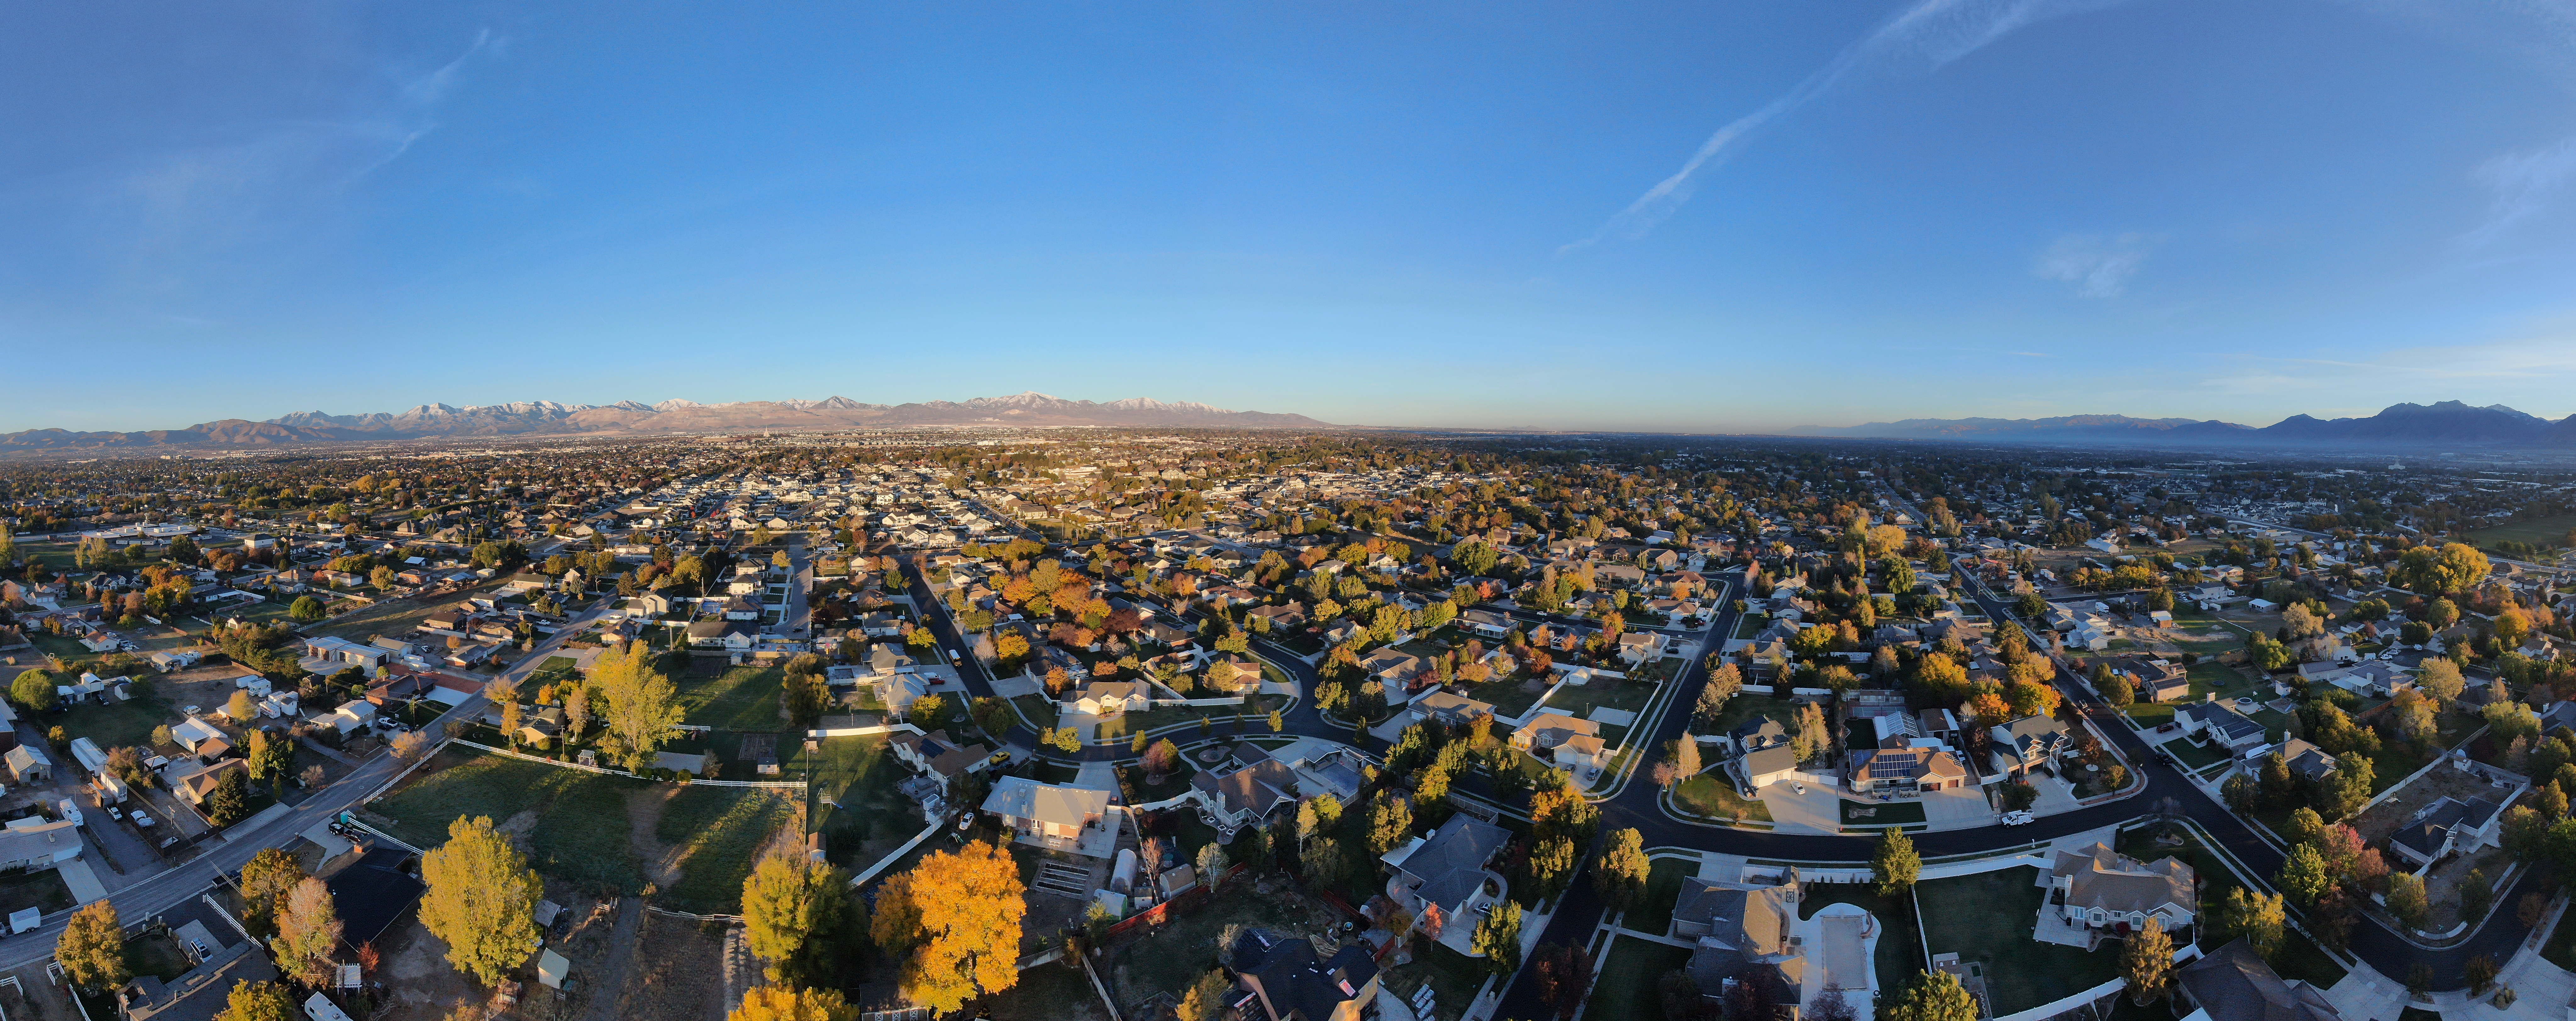 What’s in store for the Greater Salt Lake City housing market this fall?